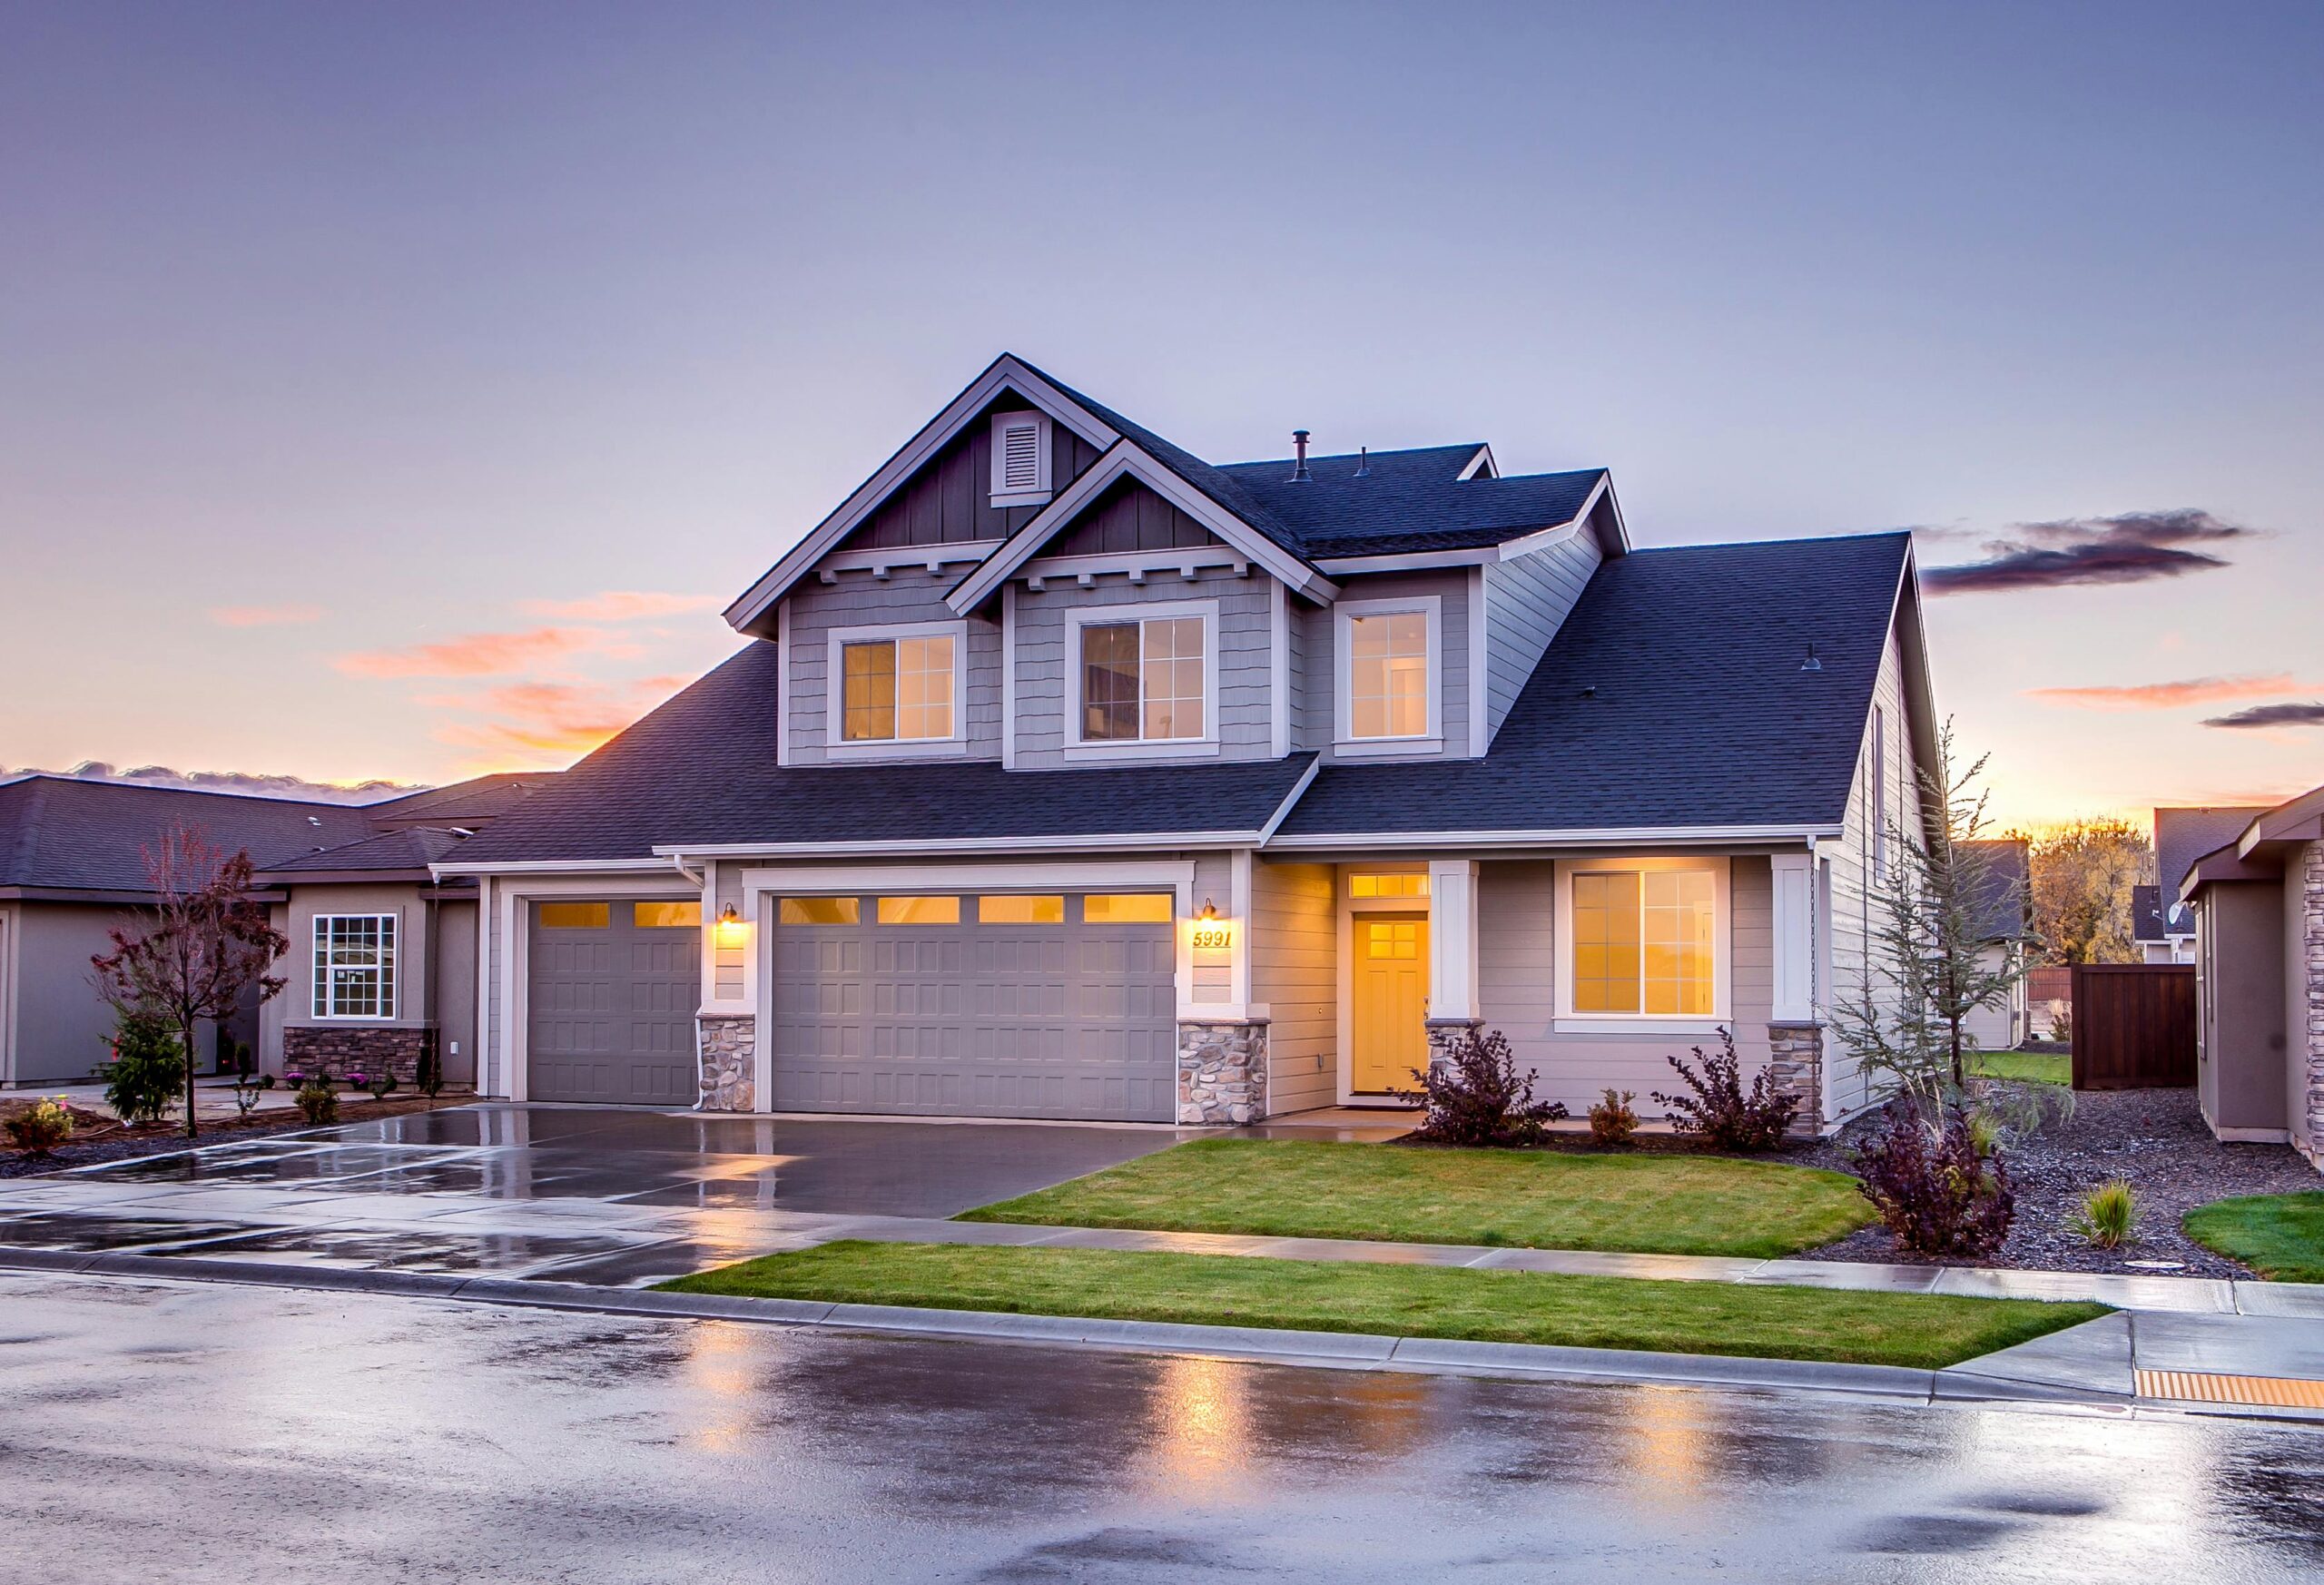 Tips to Improve Your Home's Curb Appeal